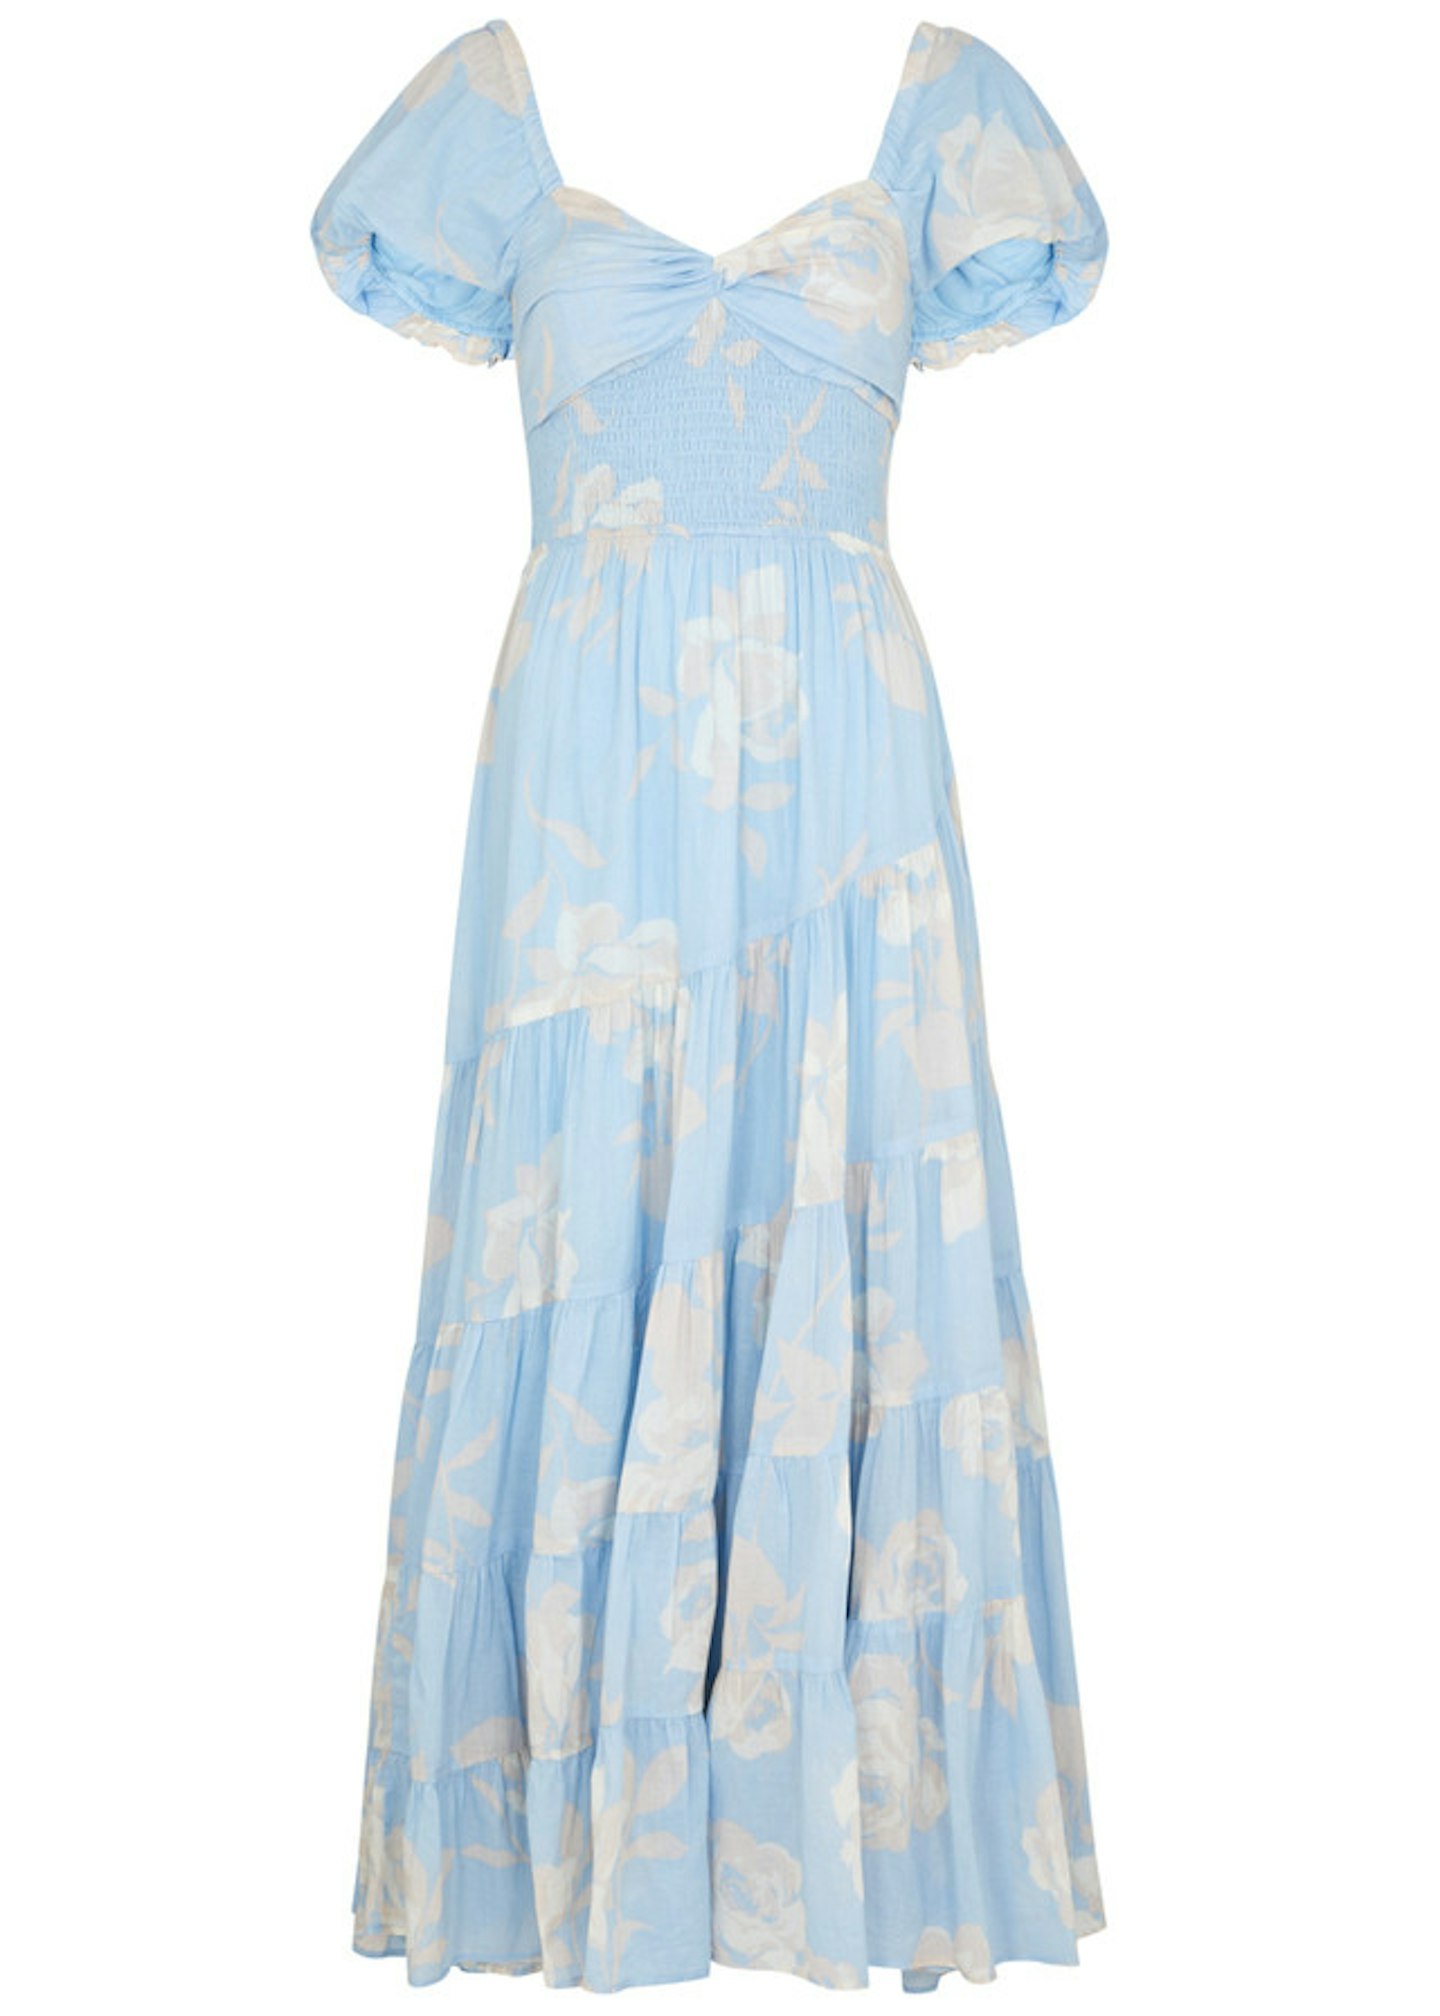 Free People, Sundrenched Maxi Dress